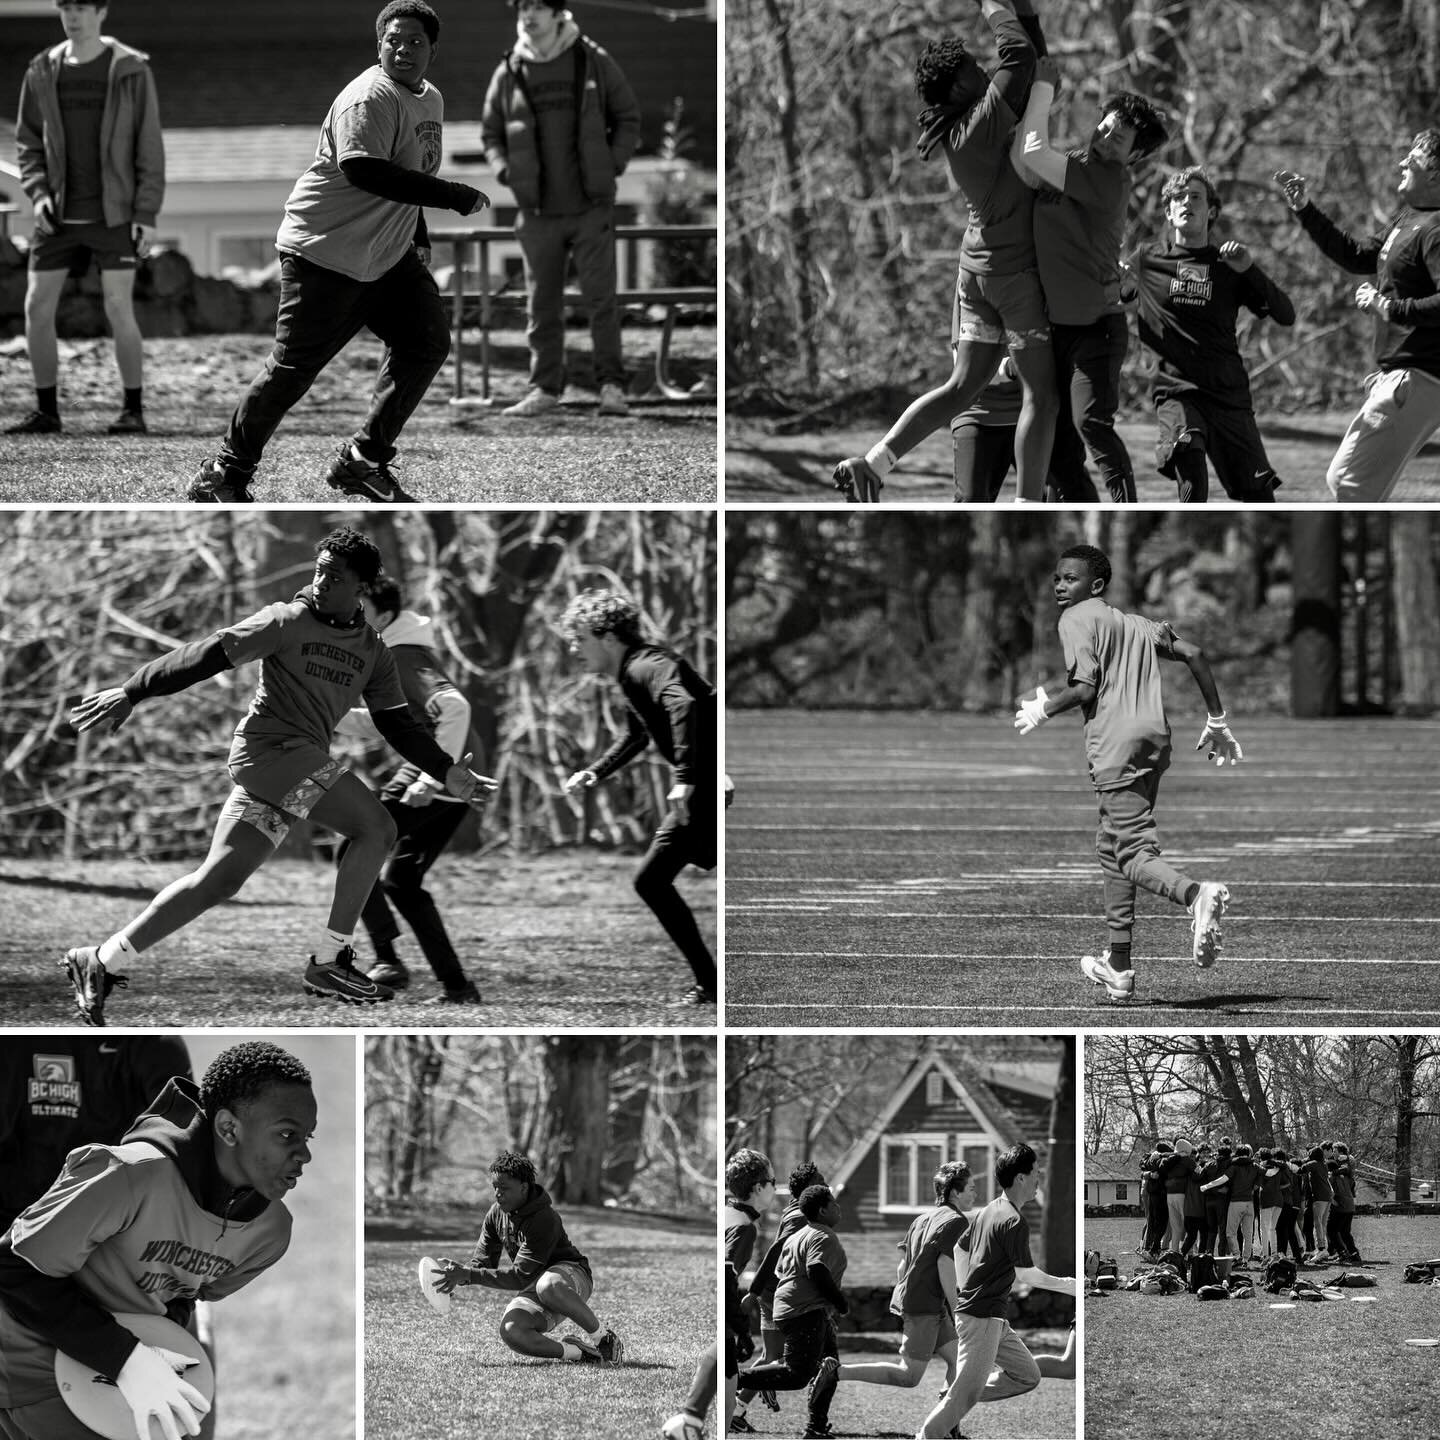 WHS Ultimate! Way to go, Joel, Tayo and Danry! Great game against SJP. @thewhsultimate 

Awesome photos by Daniel Mojica @danielmojicaphoto